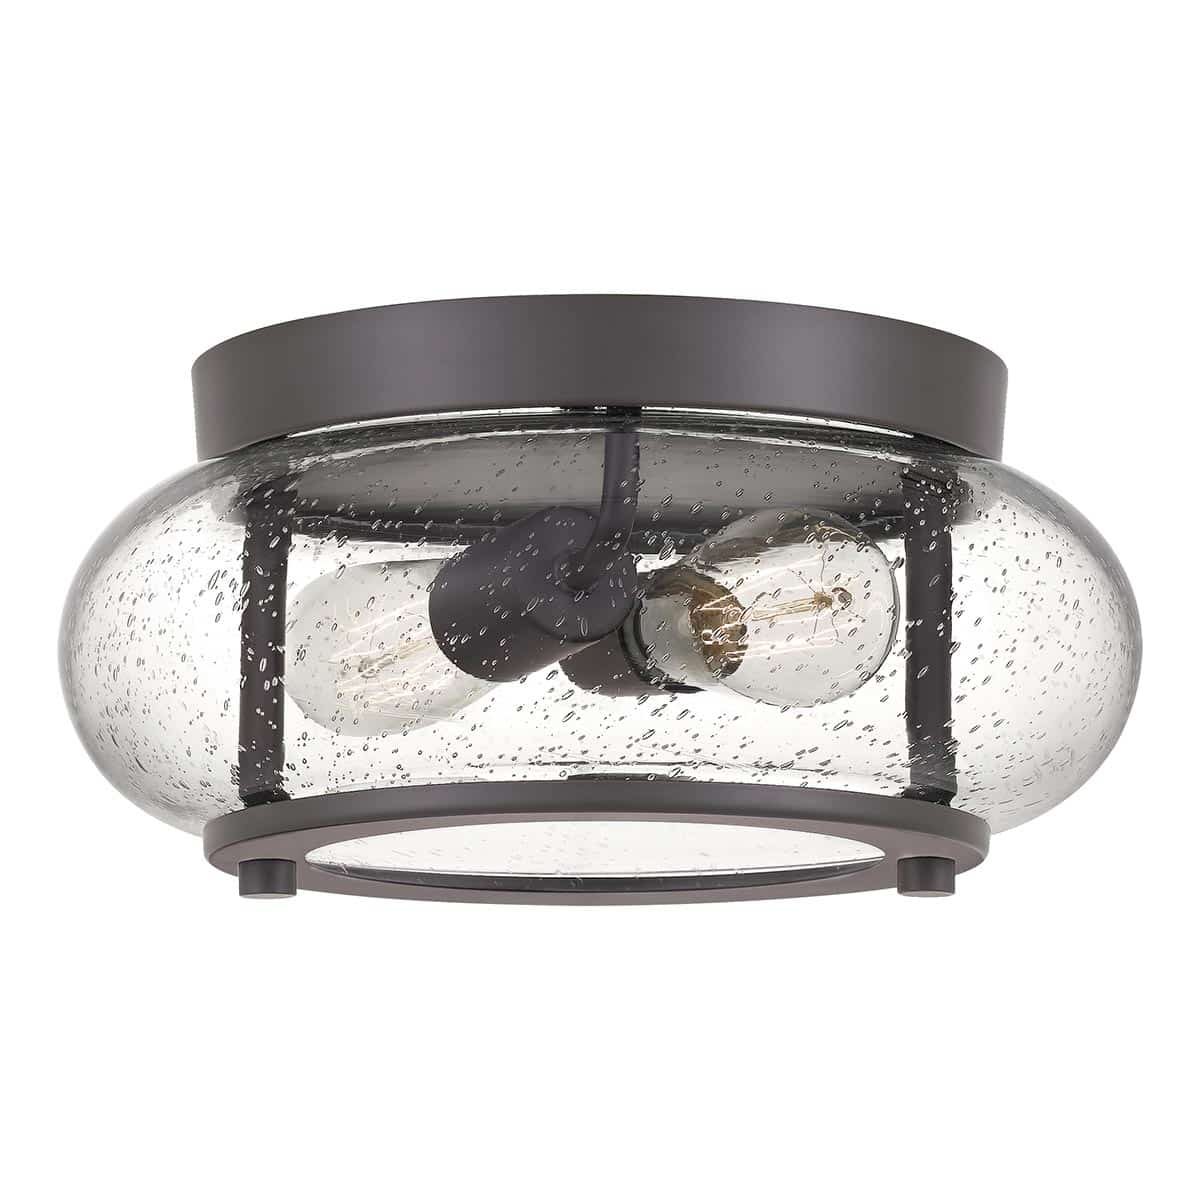 Quoizel Trilogy 2 Light Small Flush Low Ceiling Light Old Bronze Seeded Glass